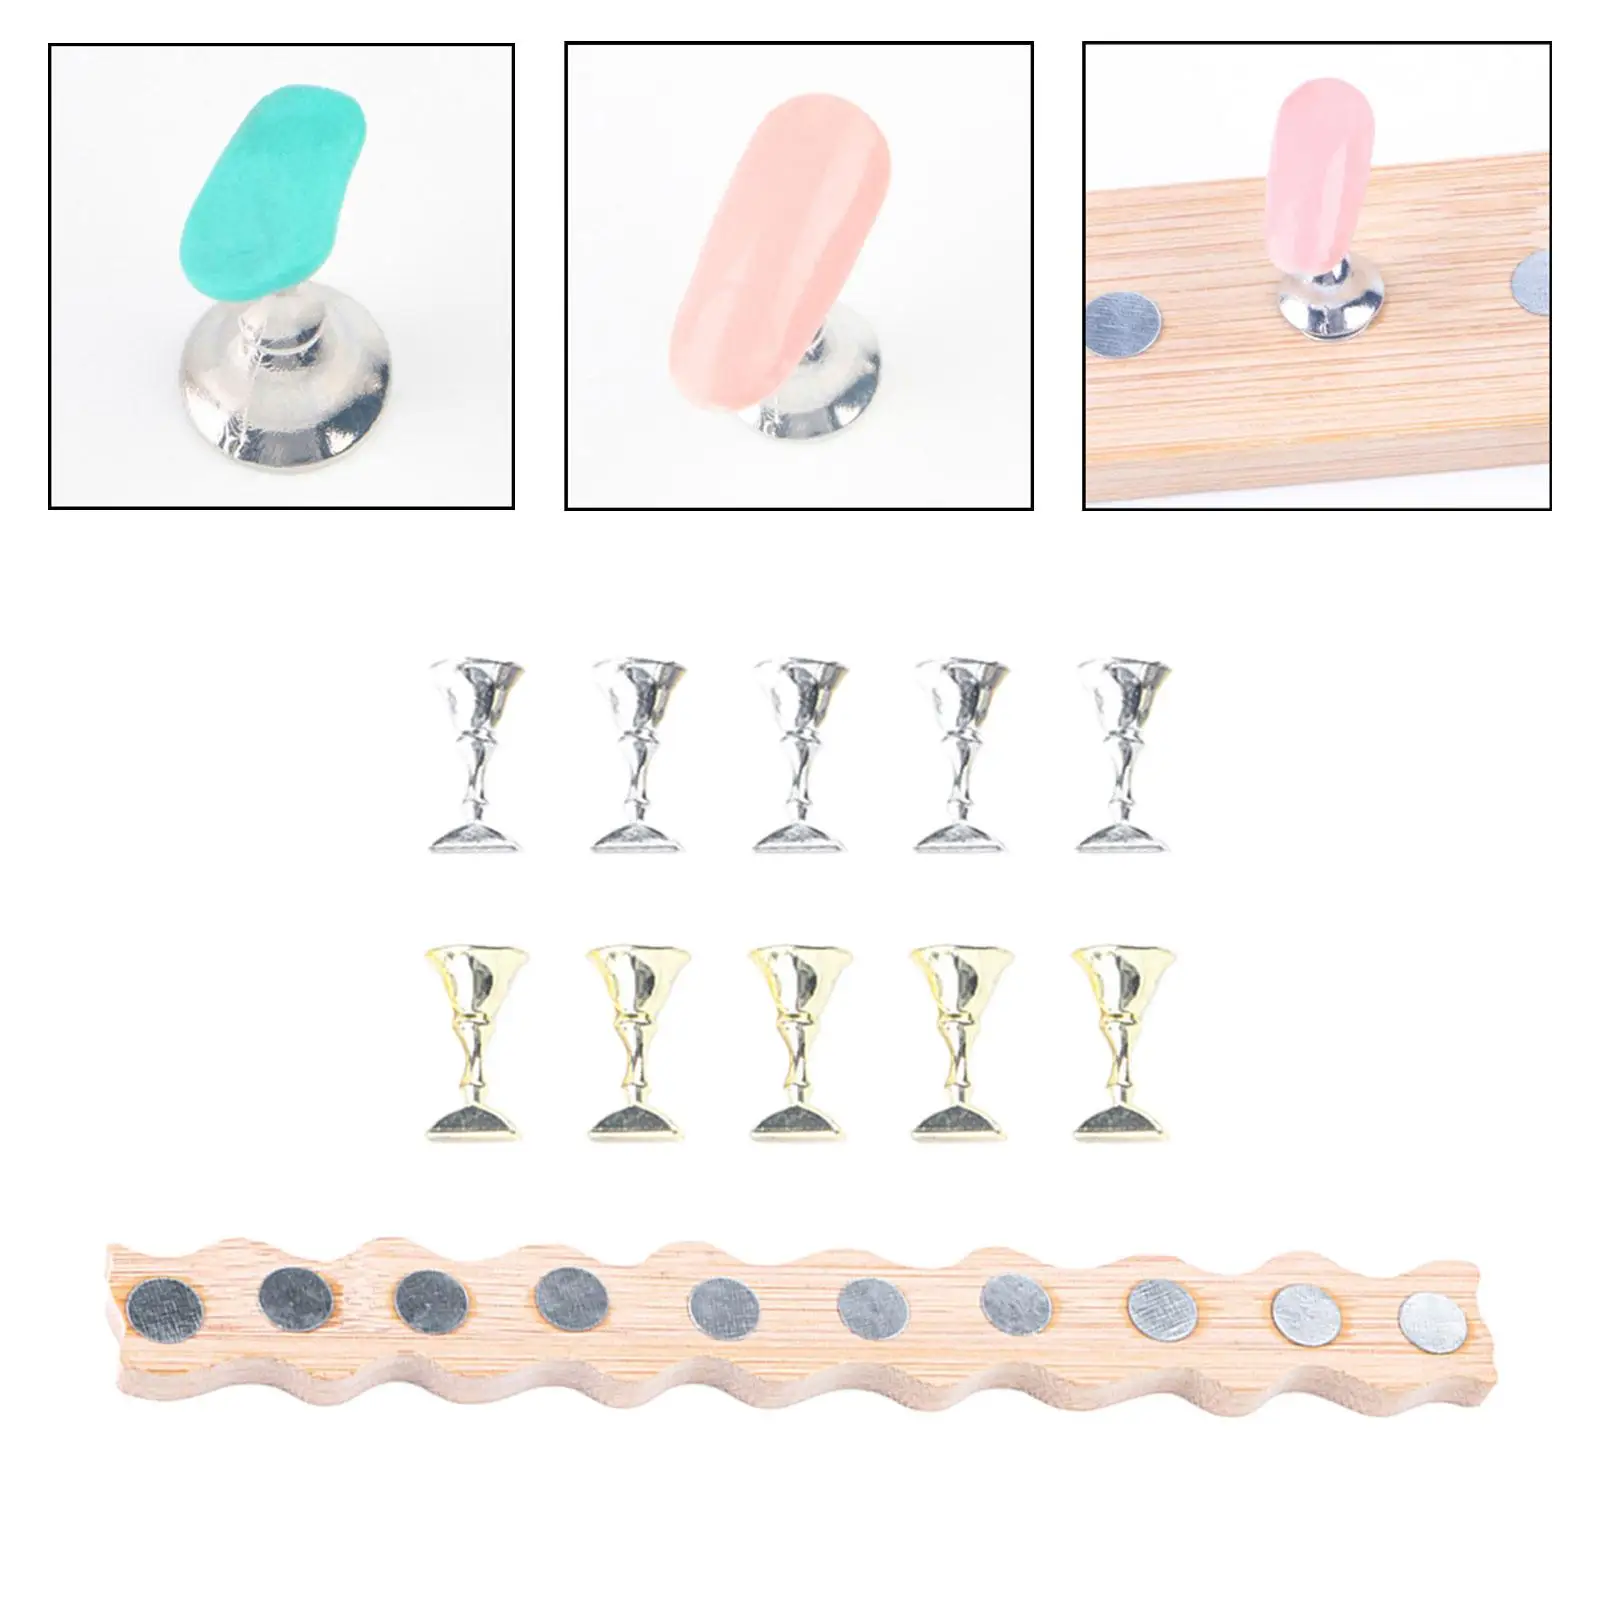 Nail Stand Durable Nail Tip Holders for Beginner Manicurists Home Salon DIY